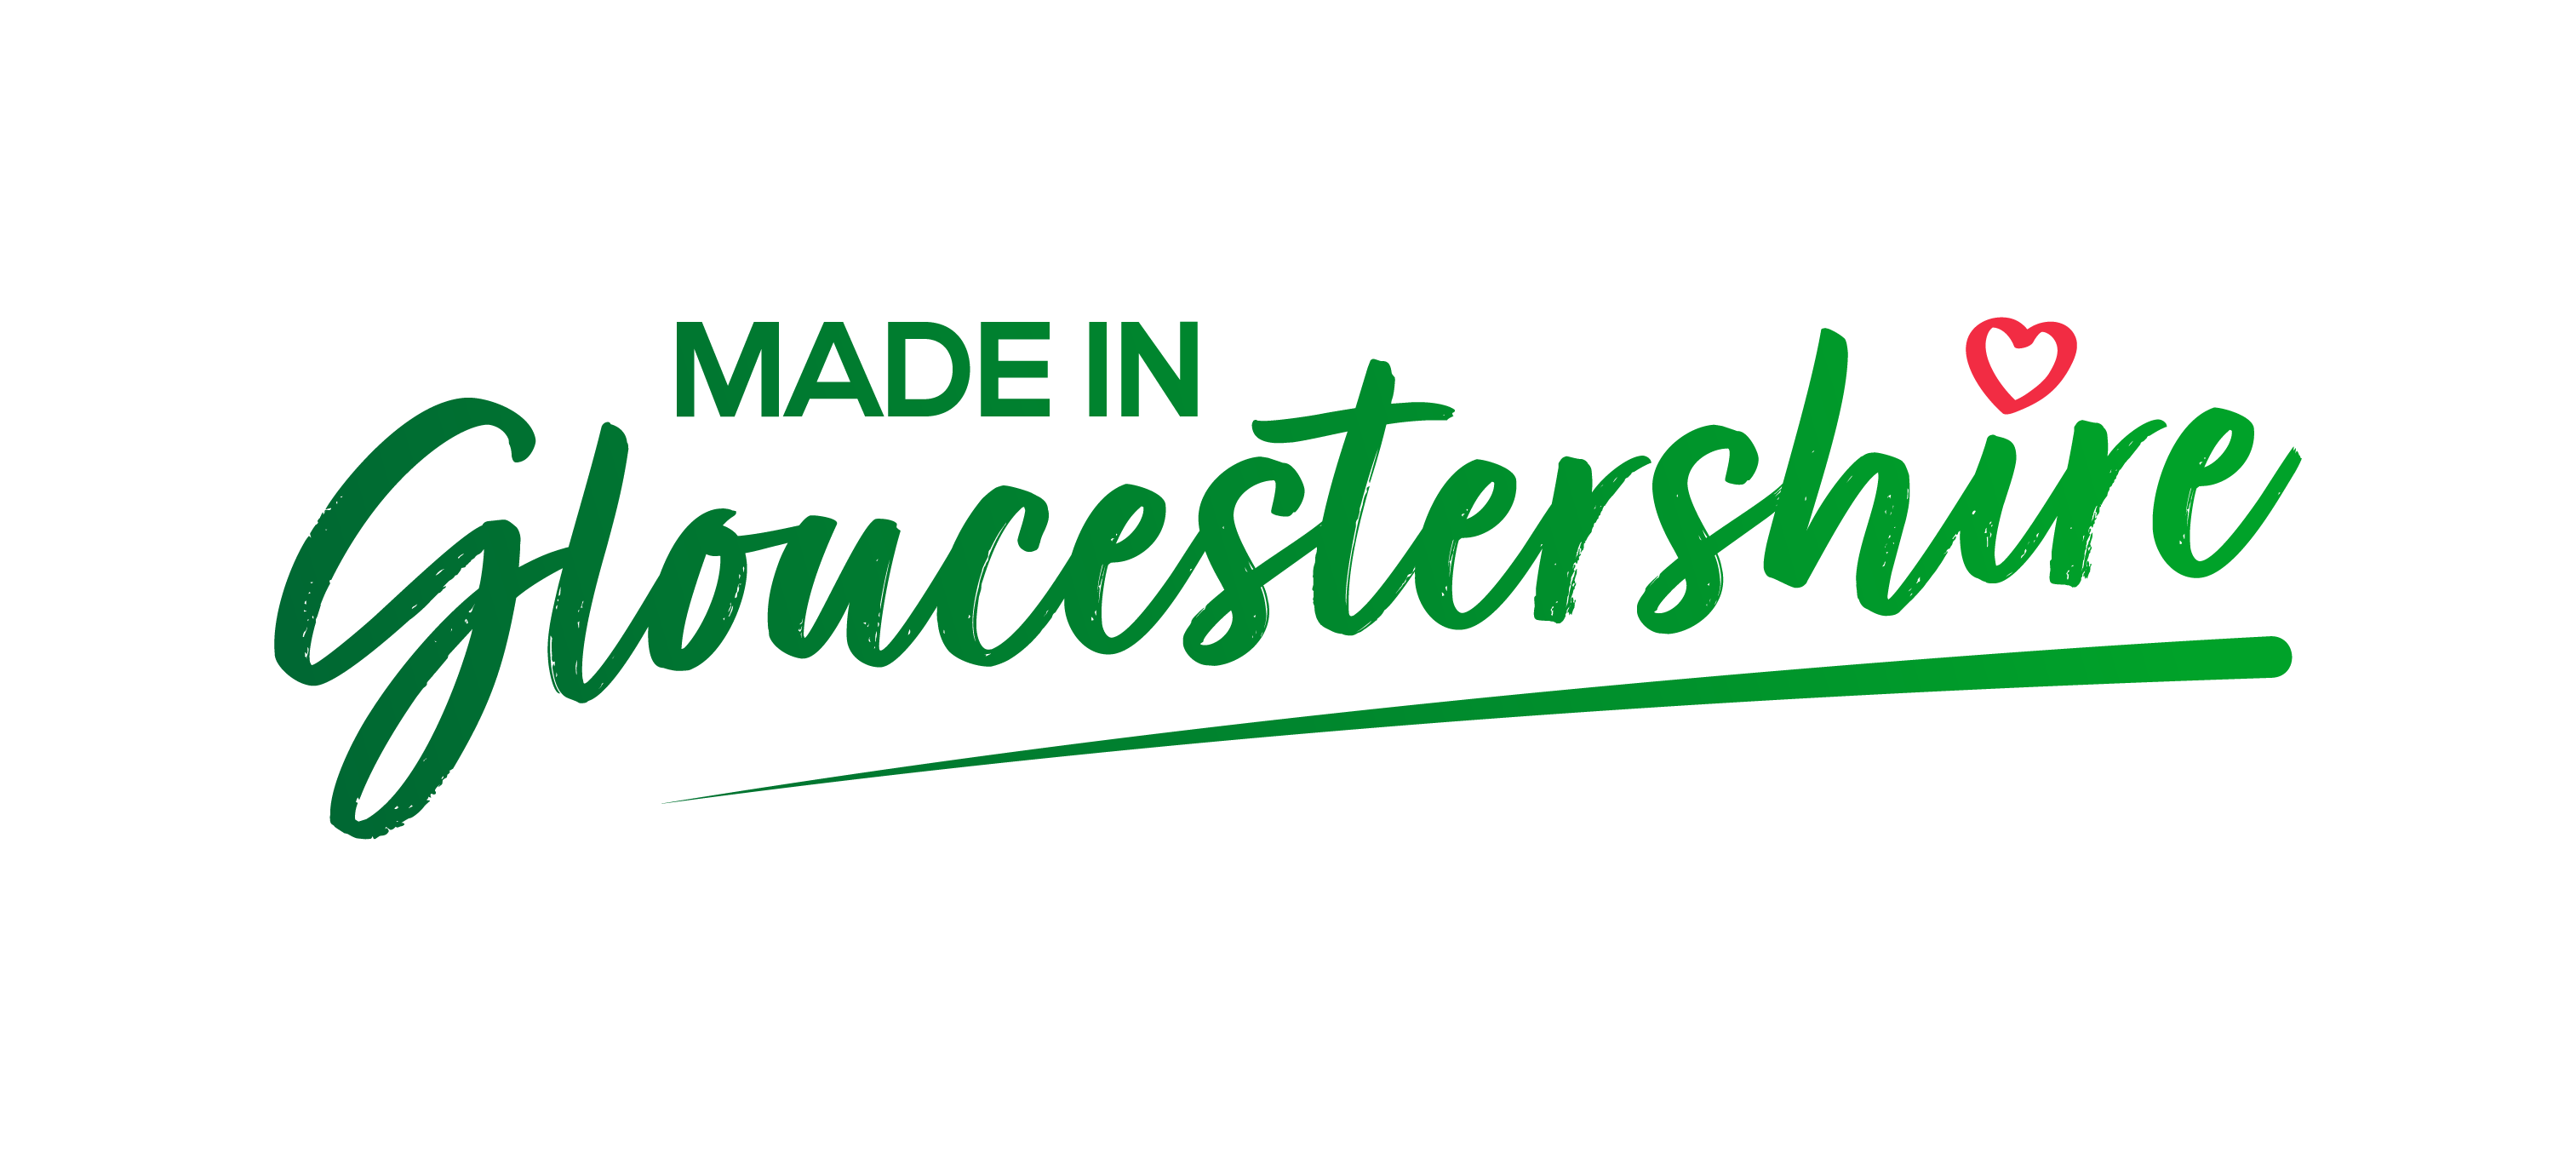 We are Made in Gloucestershire